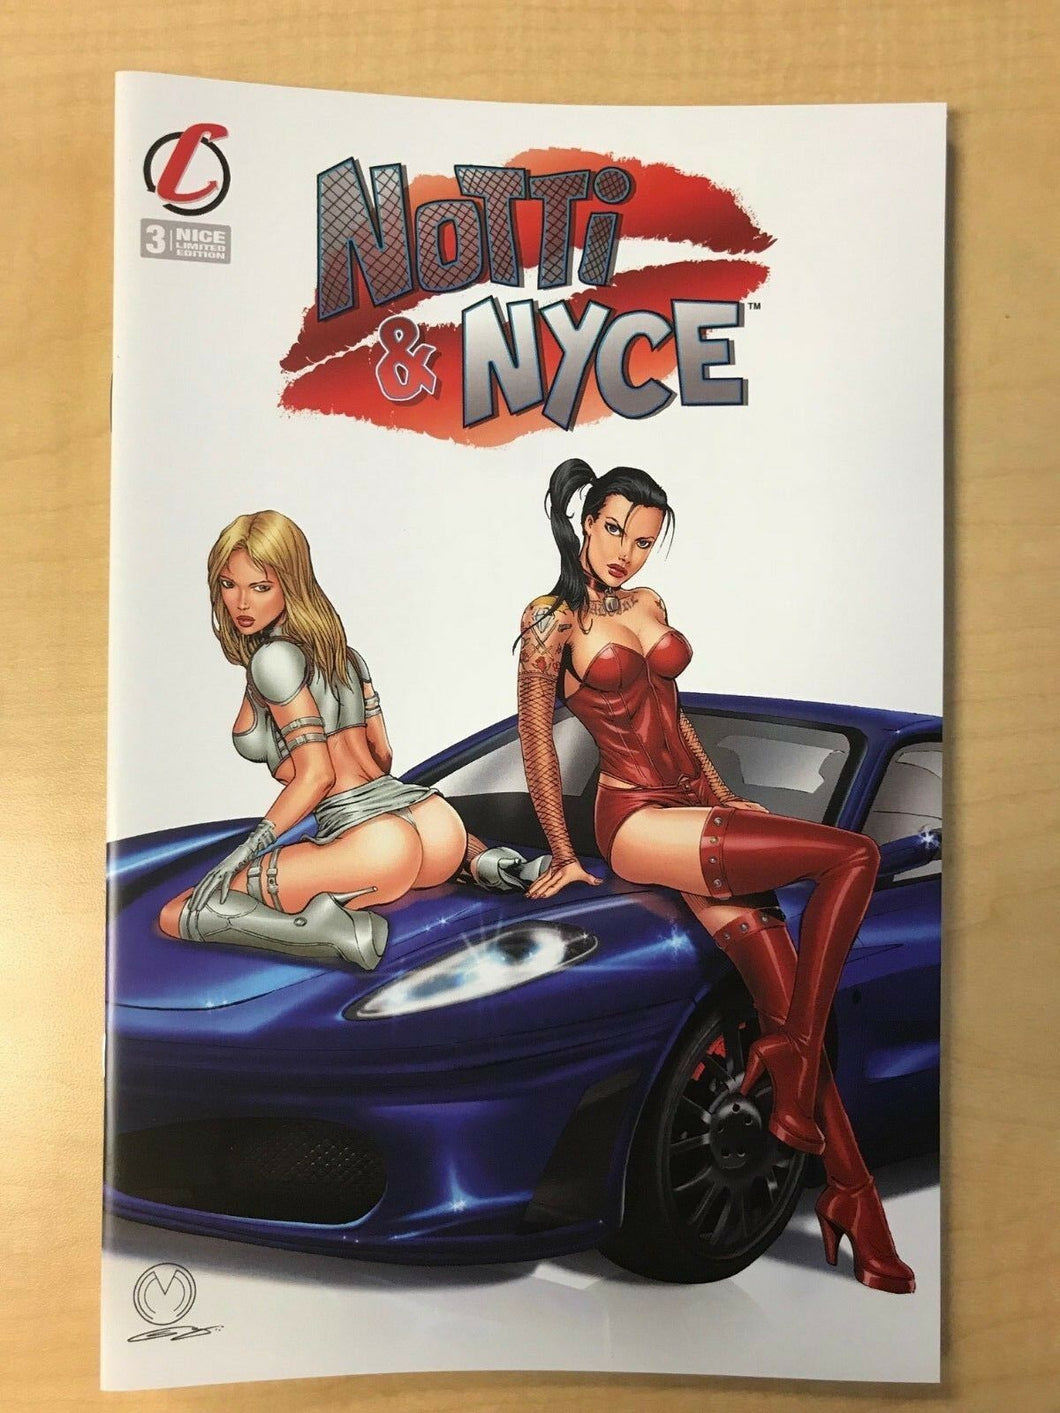 Notti & Nyce #3 Marat Mychaels NICE Variant Cover Counterpoint Comics